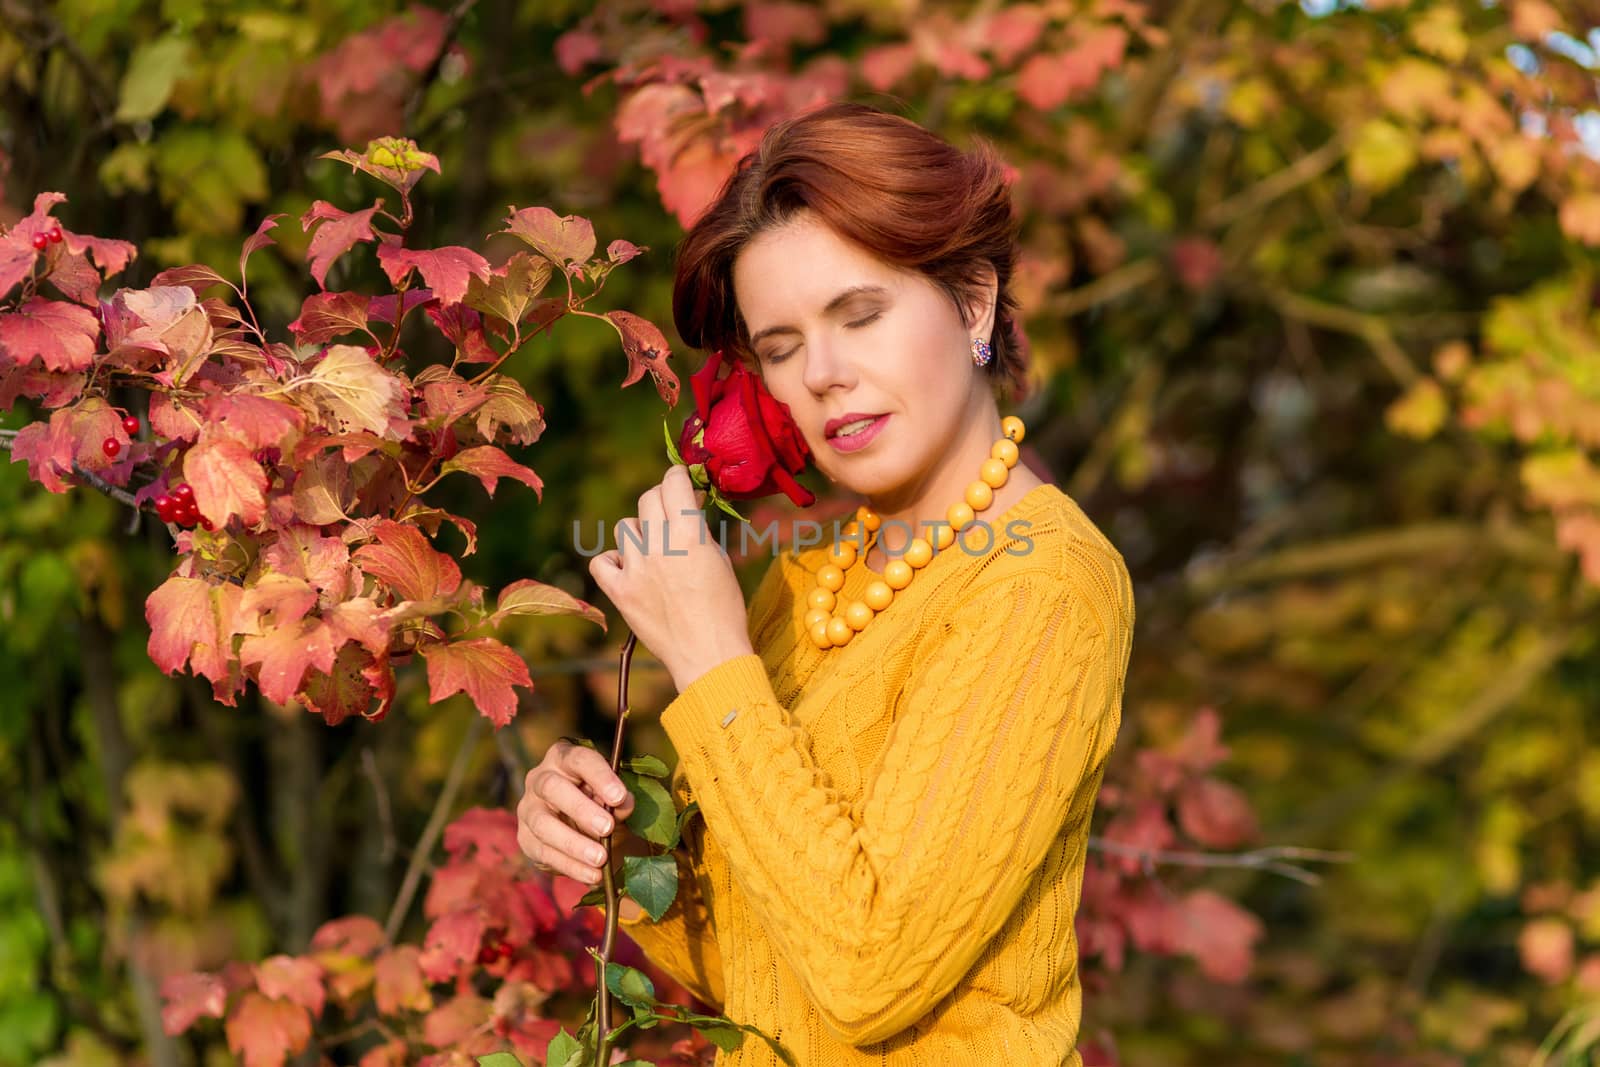 Portrait of beautiful 30 year old woman holding rose and standing near Red foliage on a viburnum Bush with closed eyes in autumn park